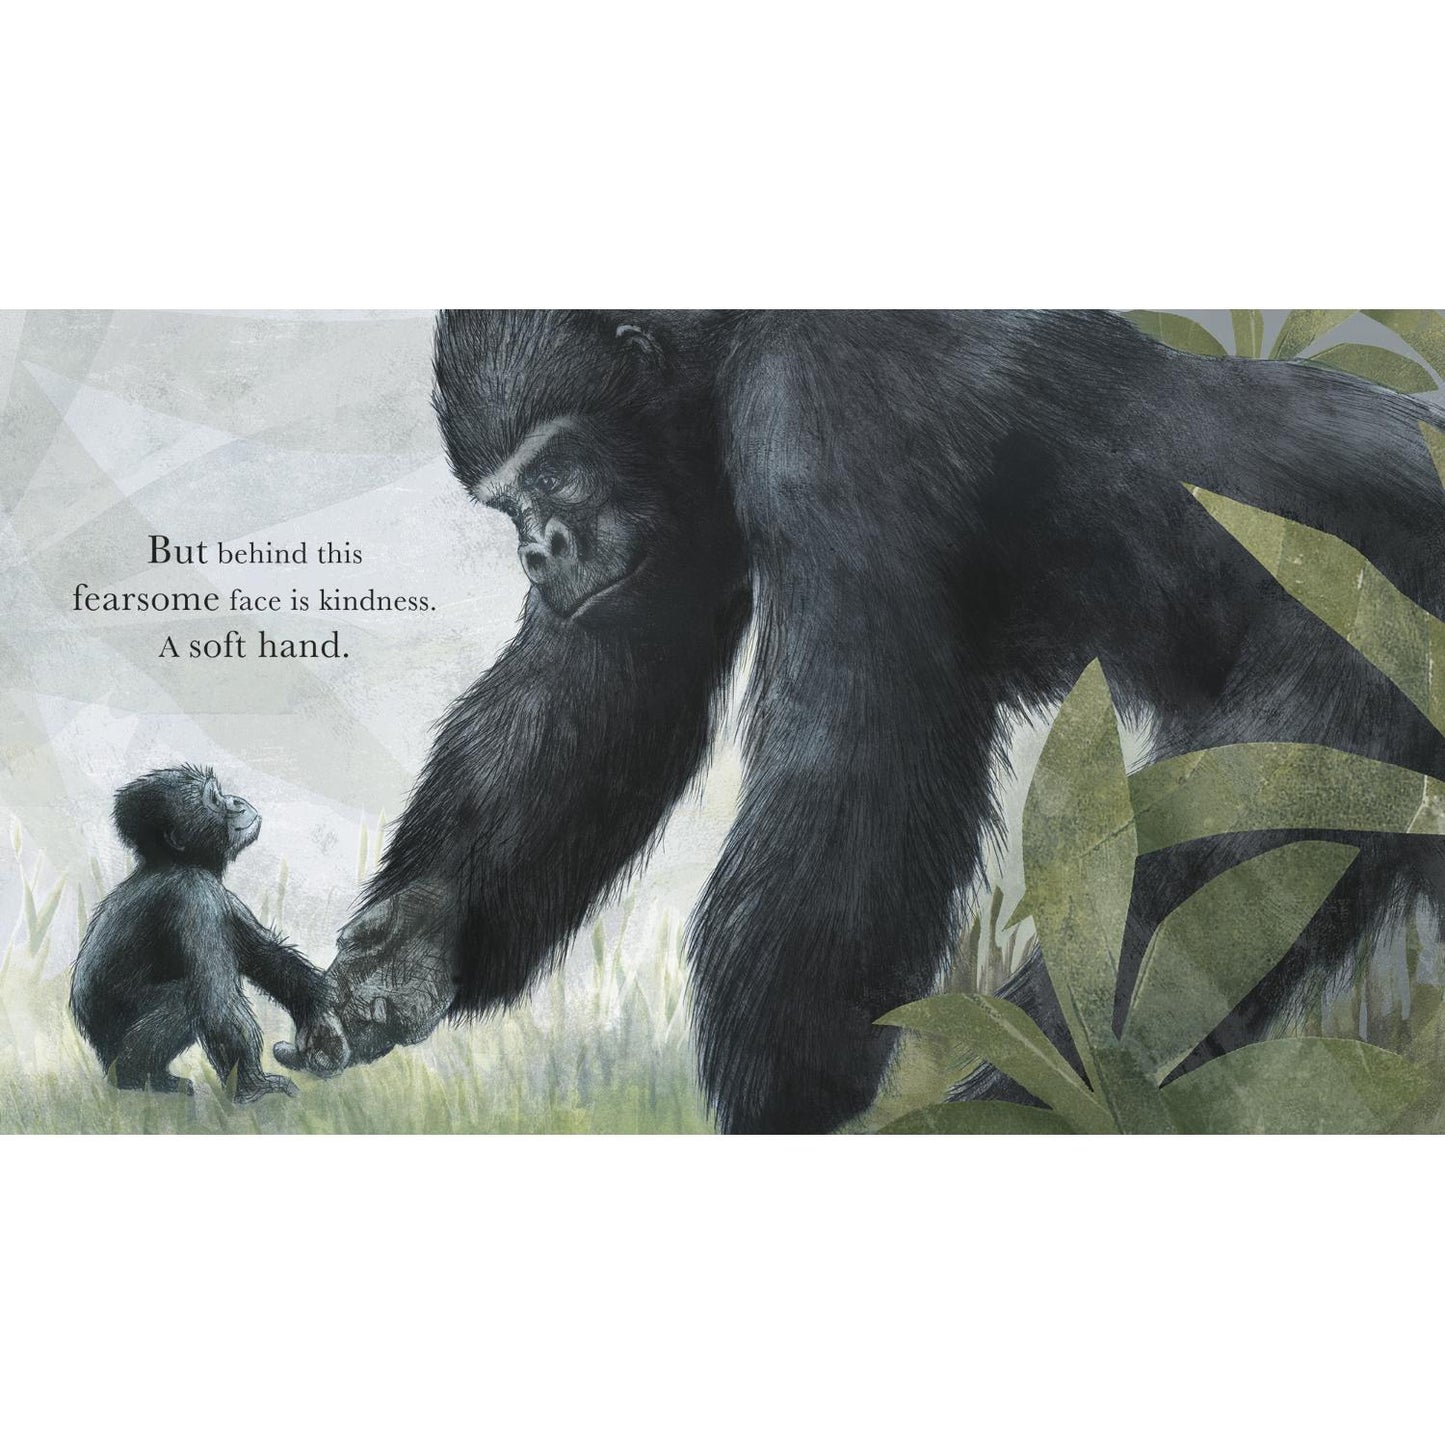 Together | Children’s Picture Book on Feelings